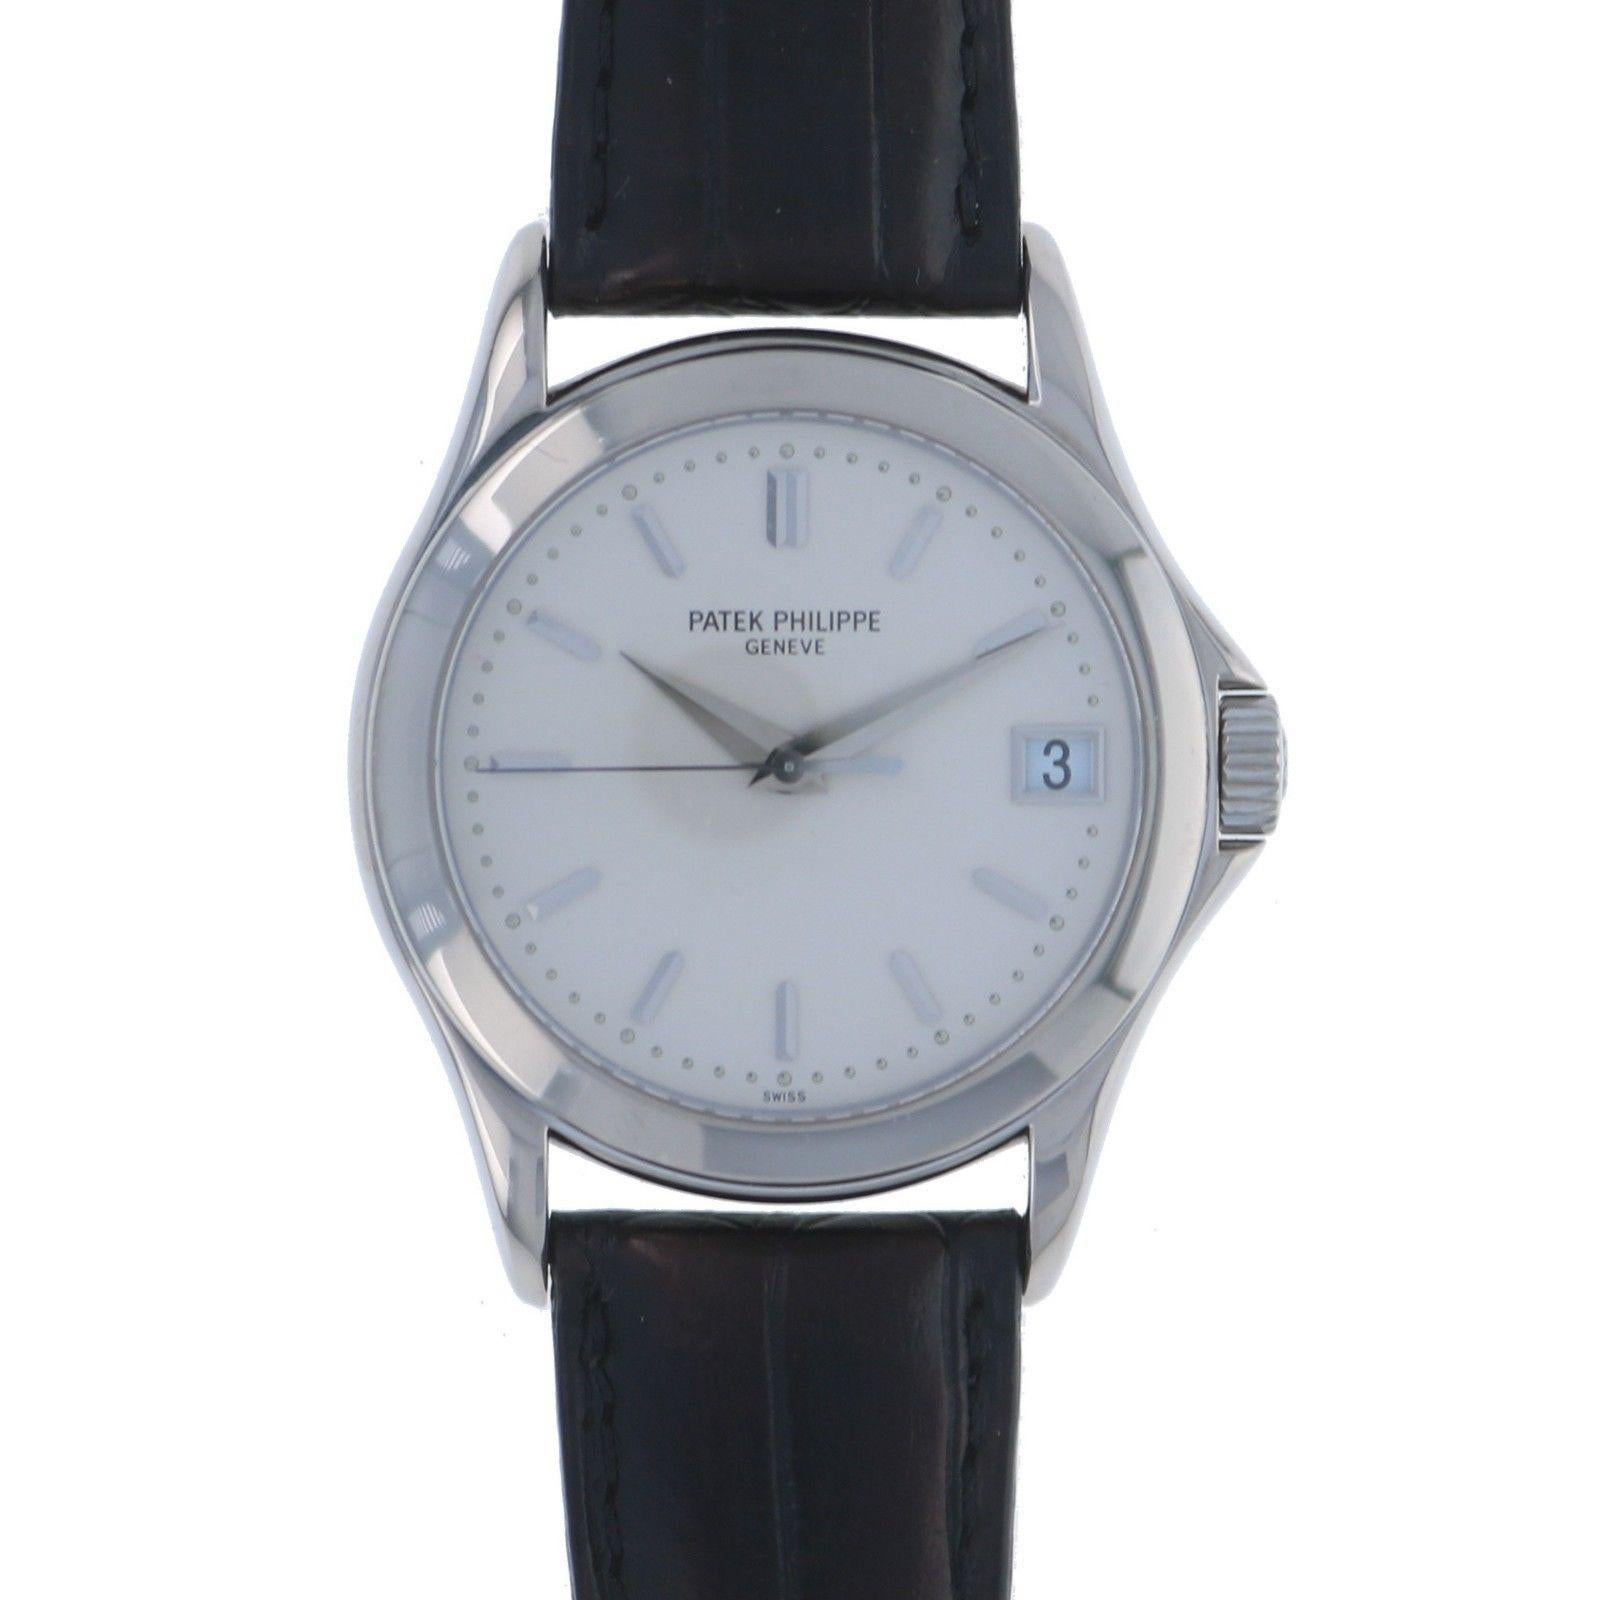 Patek Philippe Calatrava Automatic White Gold Ref. 5107G-001 In Excellent Condition For Sale In Los Angeles, CA